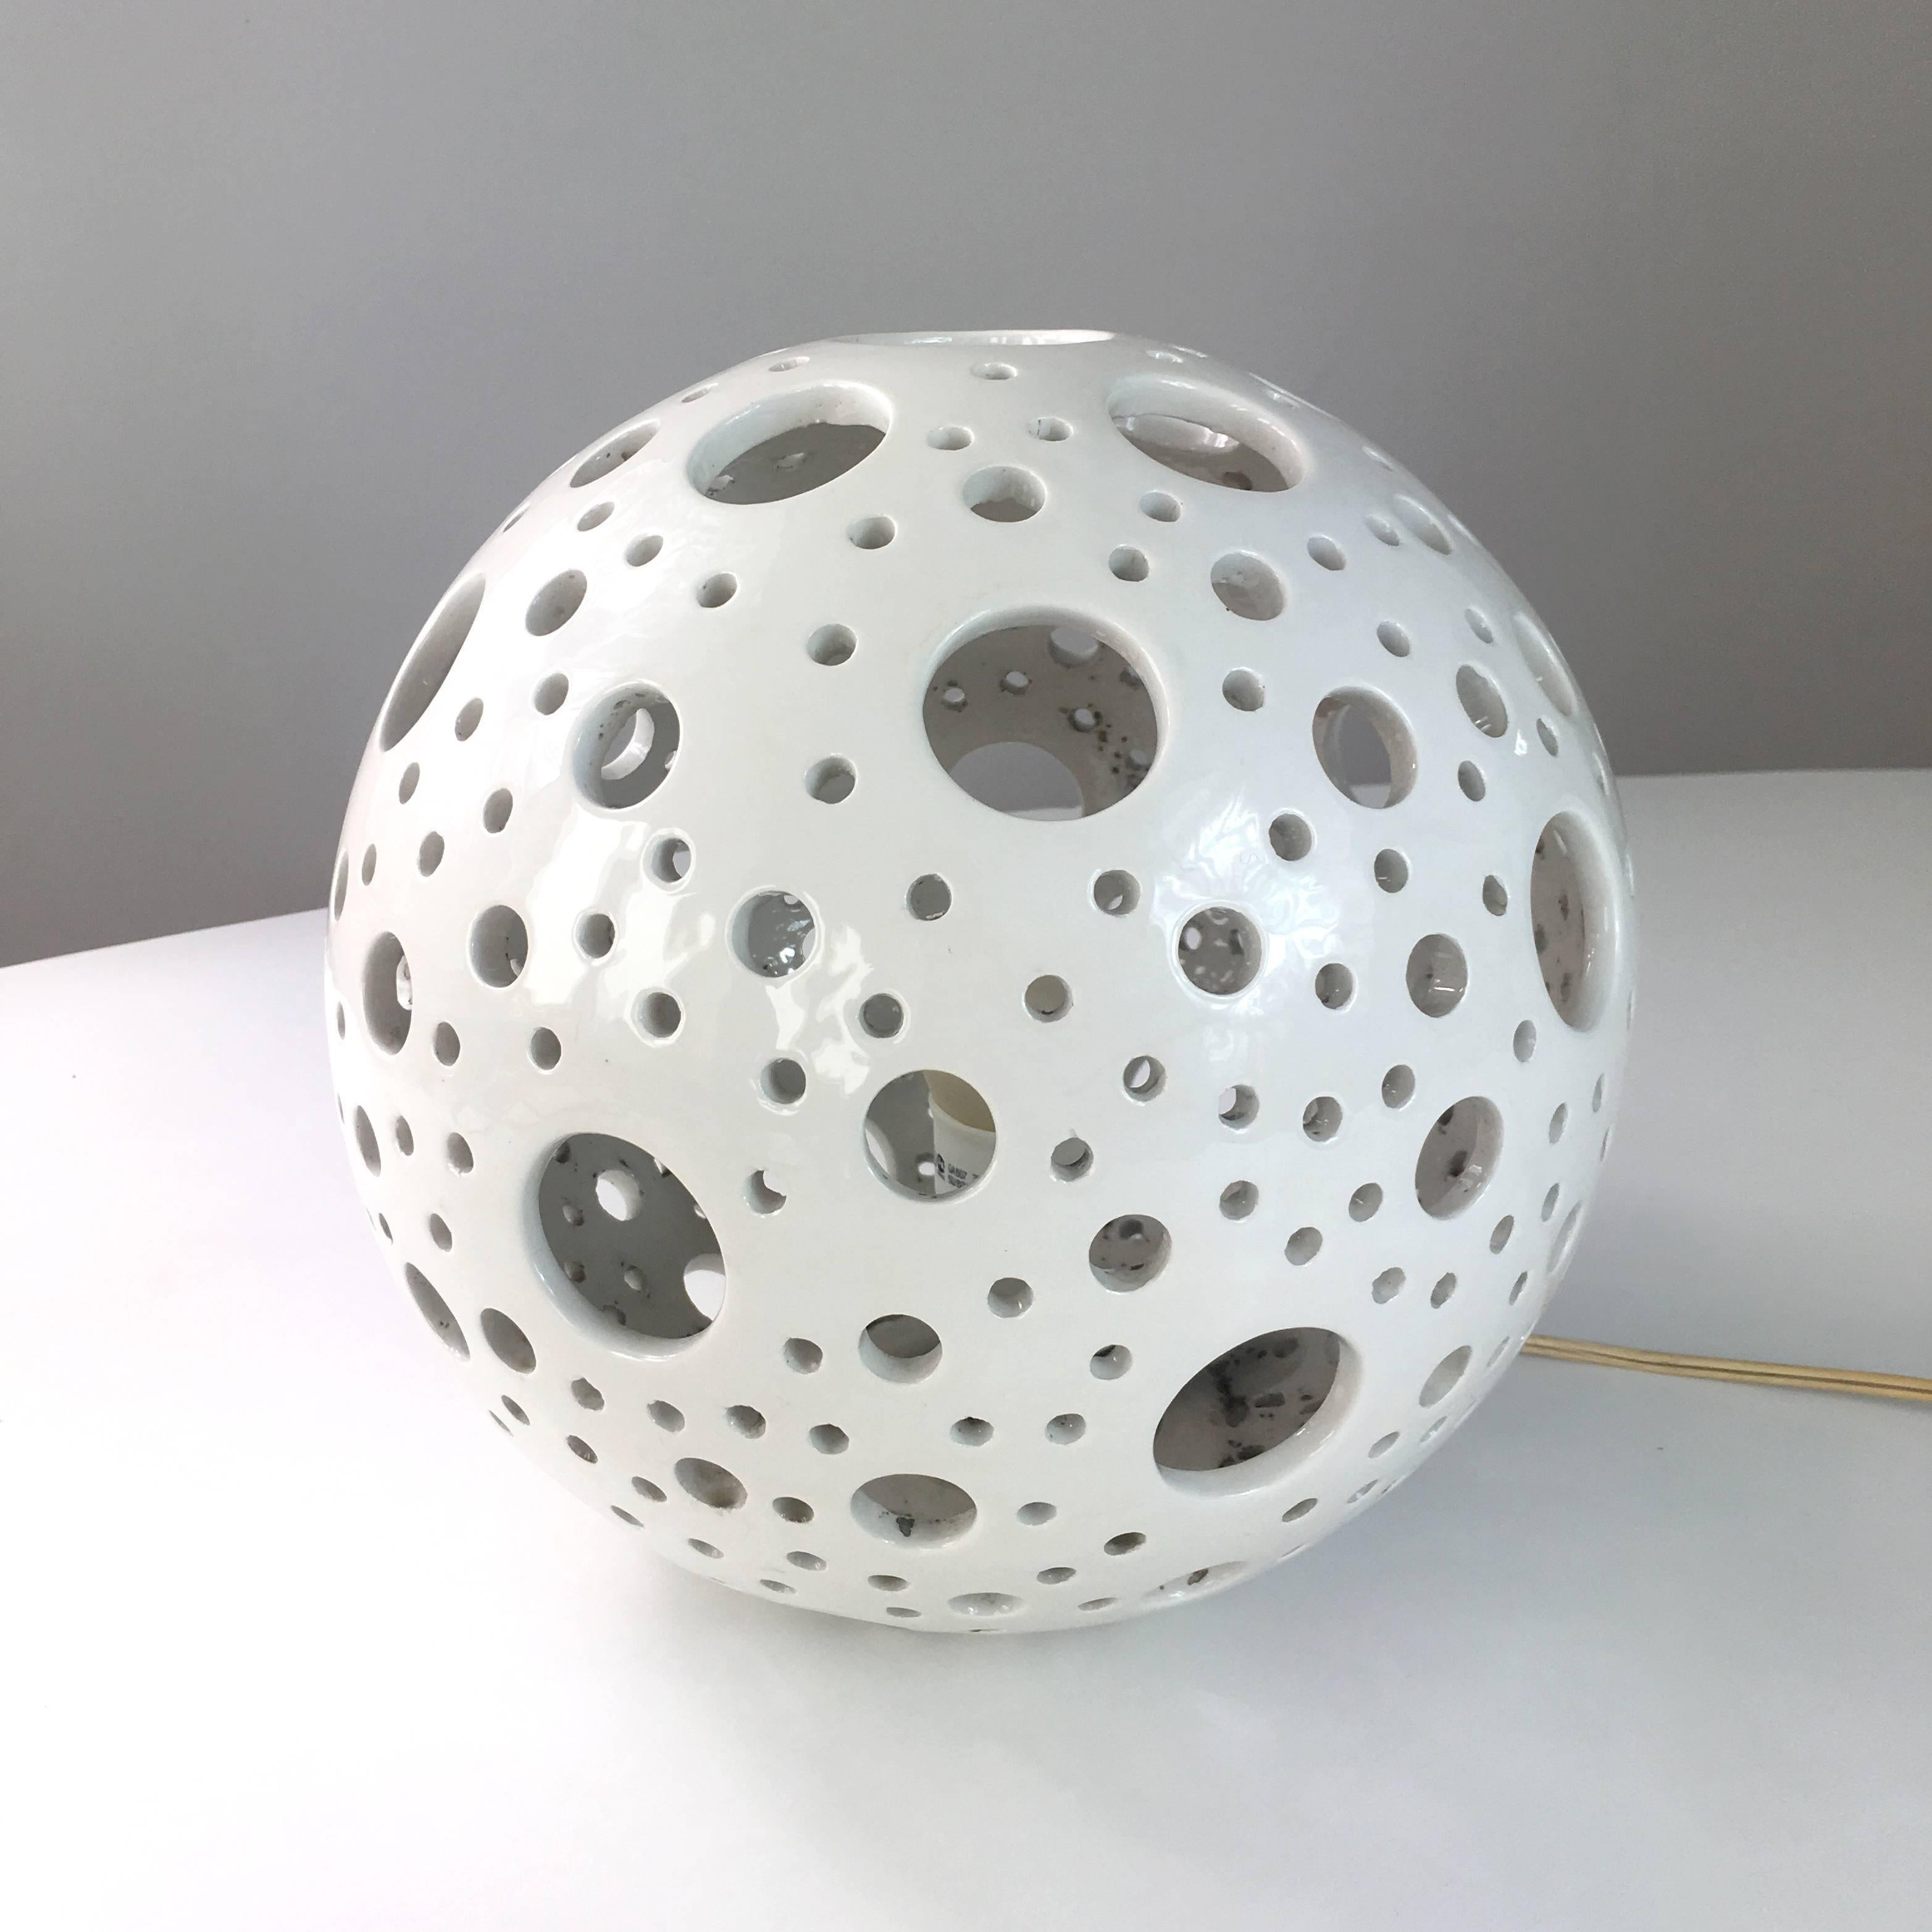 White ceramic lamp of 1970s time. Italian manufacture. Multiple circle gaps of different diameter are creating decorative lightning effect.